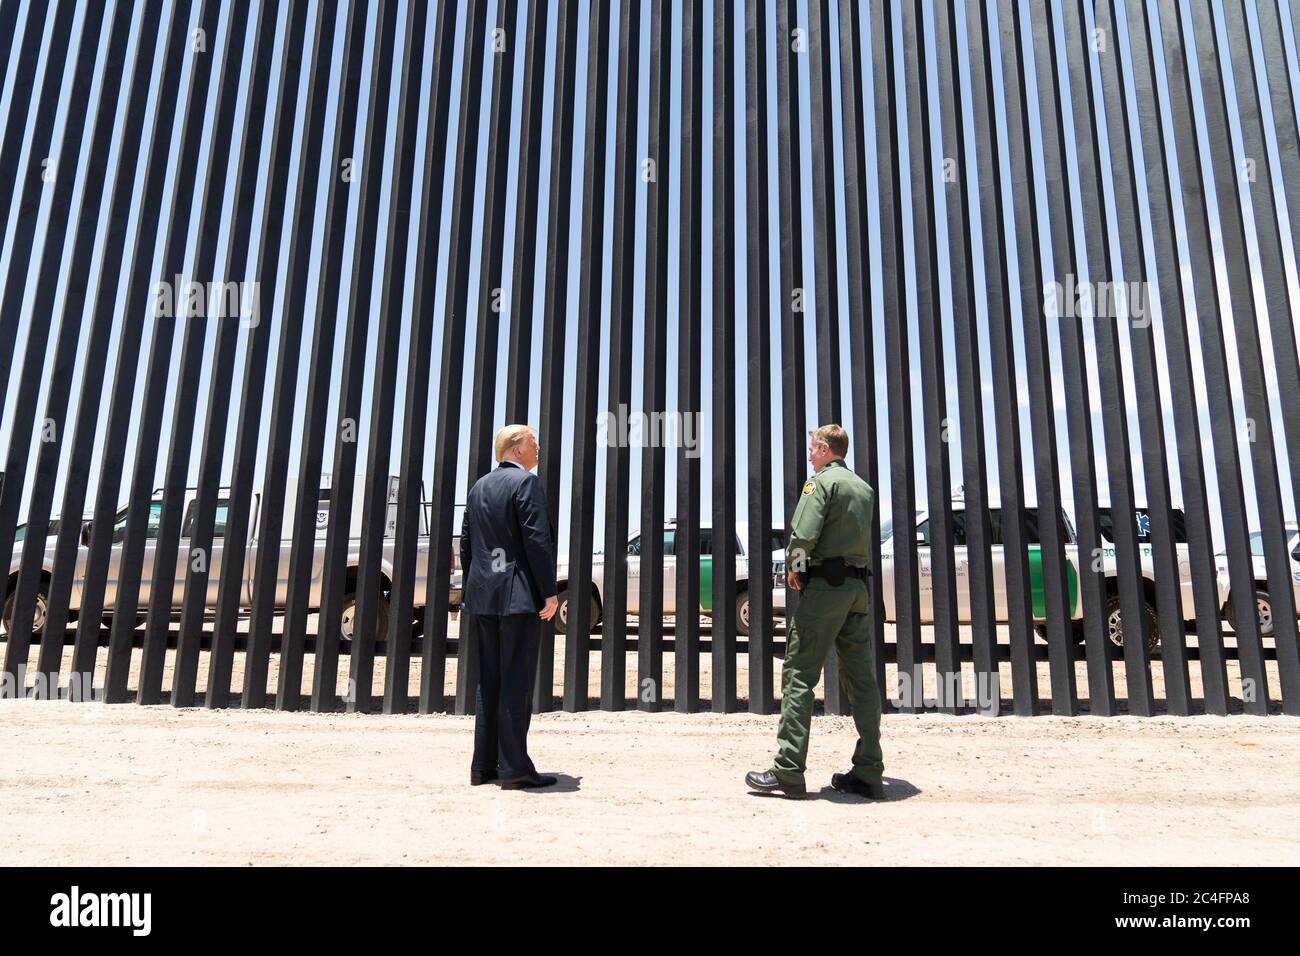 U.S. President Donald Trump is given a tour of a new section of border wall along the Mexican-American border by Border Patrol chief Rodney Scott June 23, 2020 in San Luis, Arizona. The visit marked the completion of 200 miles of border wall, the majority of which is replacement for existing structure at a cost of $20-million dollars a mile. Stock Photo